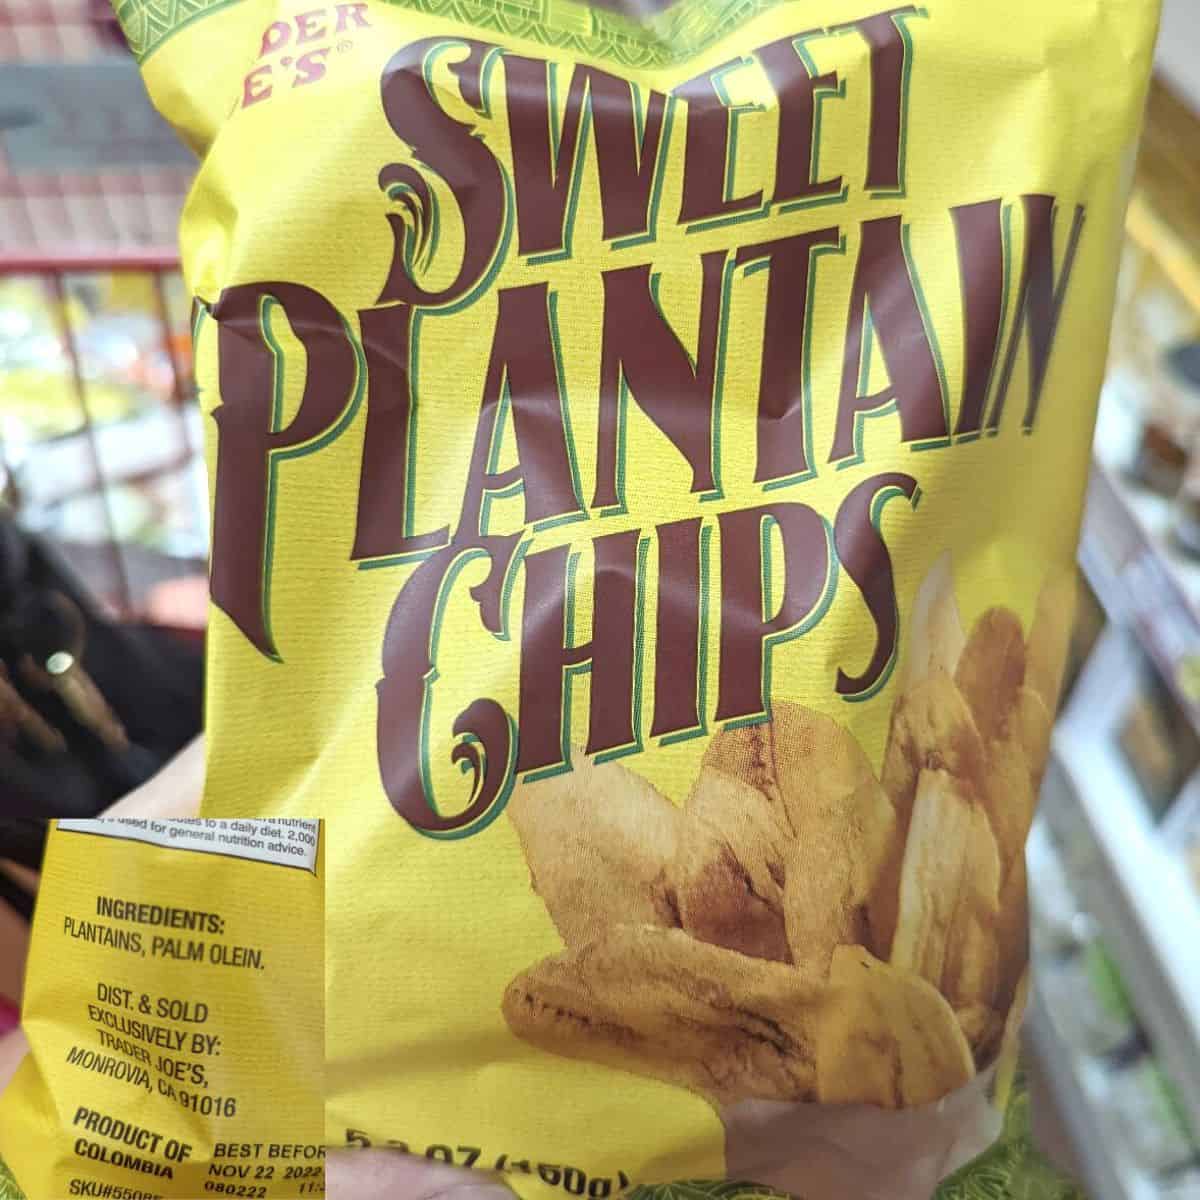 Package of sweet plantain chips and label.